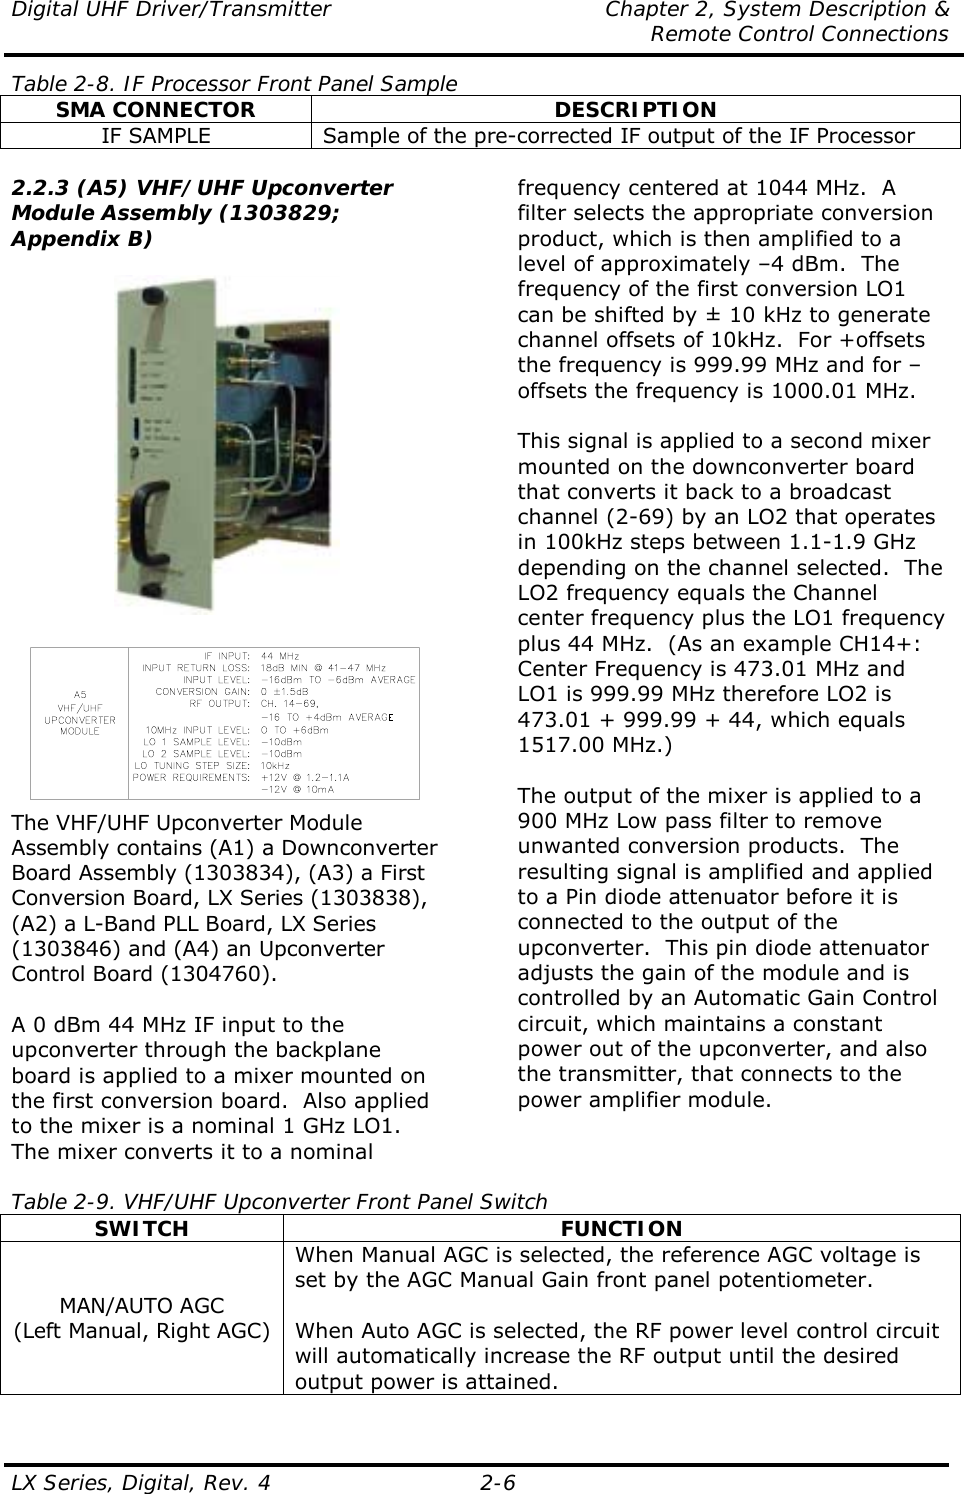 Digital UHF Driver/Transmitter  Chapter 2, System Description &amp;   Remote Control Connections LX Series, Digital, Rev. 4    2-6 Table 2-8. IF Processor Front Panel Sample SMA CONNECTOR  DESCRIPTION IF SAMPLE  Sample of the pre-corrected IF output of the IF Processor  2.2.3 (A5) VHF/UHF Upconverter Module Assembly (1303829; Appendix B)     The VHF/UHF Upconverter Module Assembly contains (A1) a Downconverter Board Assembly (1303834), (A3) a First Conversion Board, LX Series (1303838), (A2) a L-Band PLL Board, LX Series (1303846) and (A4) an Upconverter Control Board (1304760).  A 0 dBm 44 MHz IF input to the upconverter through the backplane board is applied to a mixer mounted on the first conversion board.  Also applied to the mixer is a nominal 1 GHz LO1.  The mixer converts it to a nominal frequency centered at 1044 MHz.  A filter selects the appropriate conversion product, which is then amplified to a level of approximately –4 dBm.  The frequency of the first conversion LO1 can be shifted by ± 10 kHz to generate channel offsets of 10kHz.  For +offsets the frequency is 999.99 MHz and for –offsets the frequency is 1000.01 MHz.  This signal is applied to a second mixer mounted on the downconverter board that converts it back to a broadcast channel (2-69) by an LO2 that operates in 100kHz steps between 1.1-1.9 GHz depending on the channel selected.  The LO2 frequency equals the Channel center frequency plus the LO1 frequency plus 44 MHz.  (As an example CH14+: Center Frequency is 473.01 MHz and LO1 is 999.99 MHz therefore LO2 is 473.01 + 999.99 + 44, which equals 1517.00 MHz.)  The output of the mixer is applied to a 900 MHz Low pass filter to remove unwanted conversion products.  The resulting signal is amplified and applied to a Pin diode attenuator before it is connected to the output of the upconverter.  This pin diode attenuator adjusts the gain of the module and is controlled by an Automatic Gain Control circuit, which maintains a constant power out of the upconverter, and also the transmitter, that connects to the power amplifier module.   Table 2-9. VHF/UHF Upconverter Front Panel Switch SWITCH FUNCTION MAN/AUTO AGC (Left Manual, Right AGC) When Manual AGC is selected, the reference AGC voltage is set by the AGC Manual Gain front panel potentiometer.   When Auto AGC is selected, the RF power level control circuit will automatically increase the RF output until the desired output power is attained. 